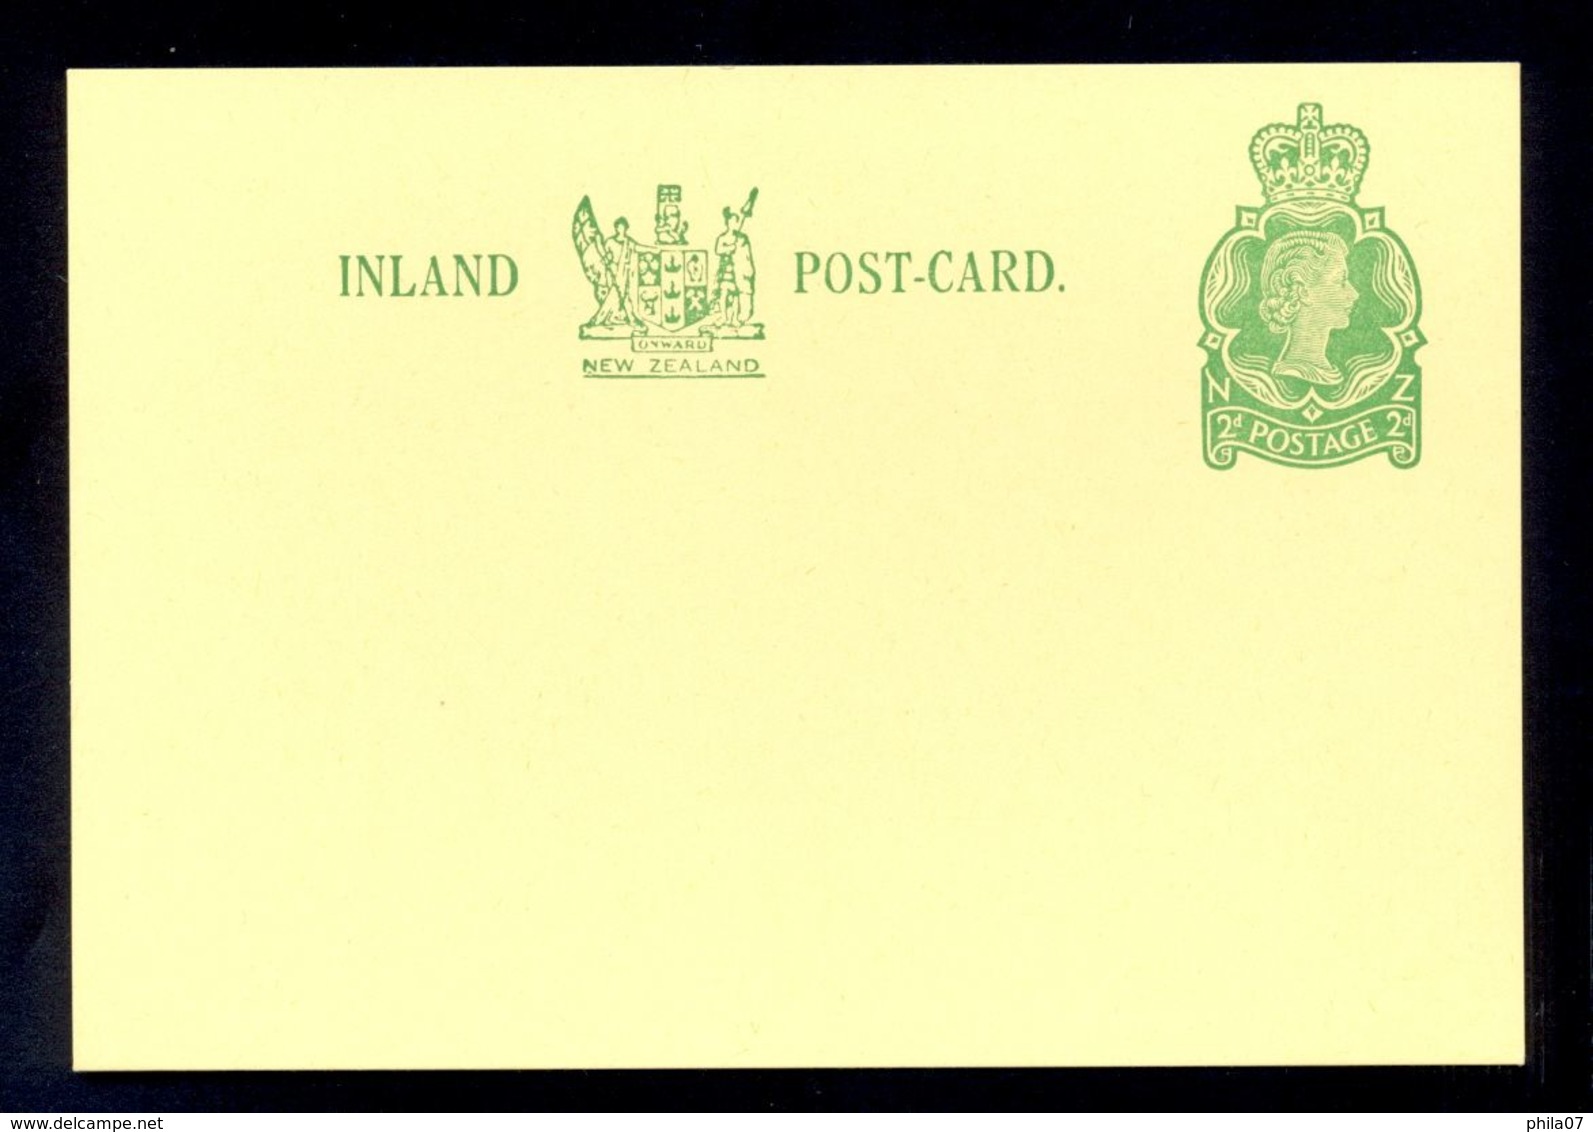 NEW ZEALAND - INLAND - Post-card With Imprinted Value, Not Traveled In Good Condition. - Postal Stationery